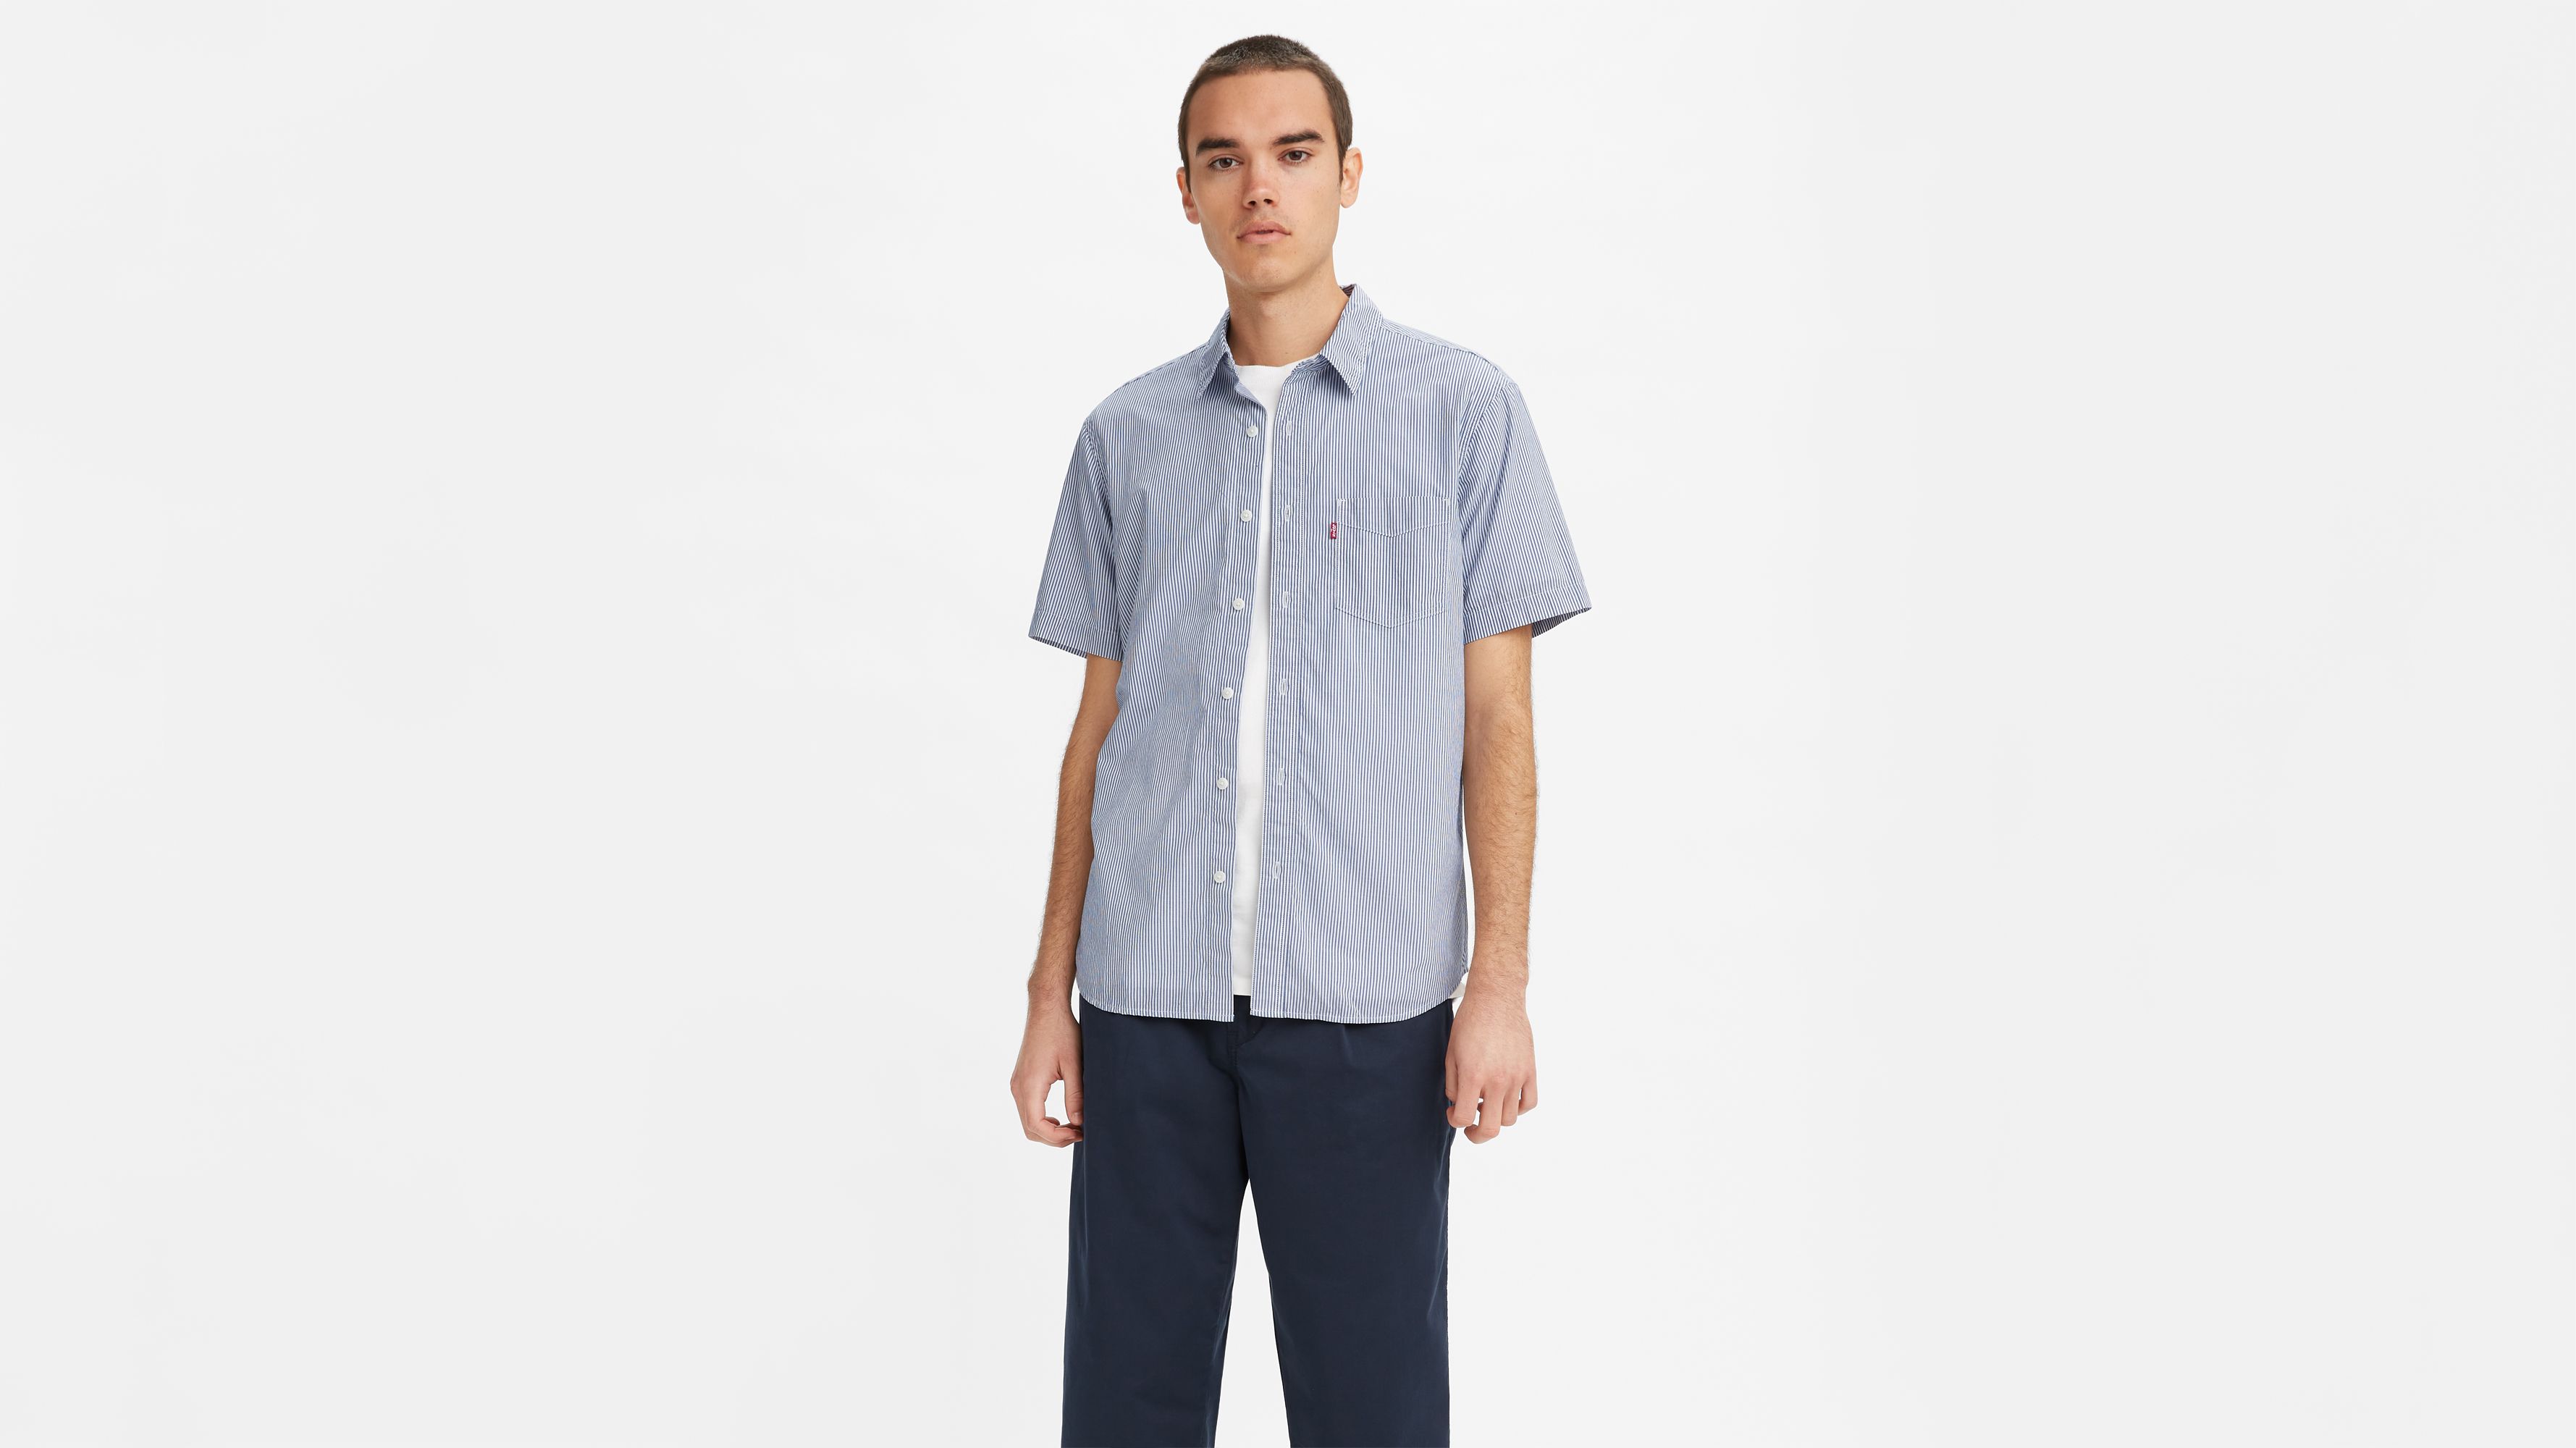 levis shirts online shopping